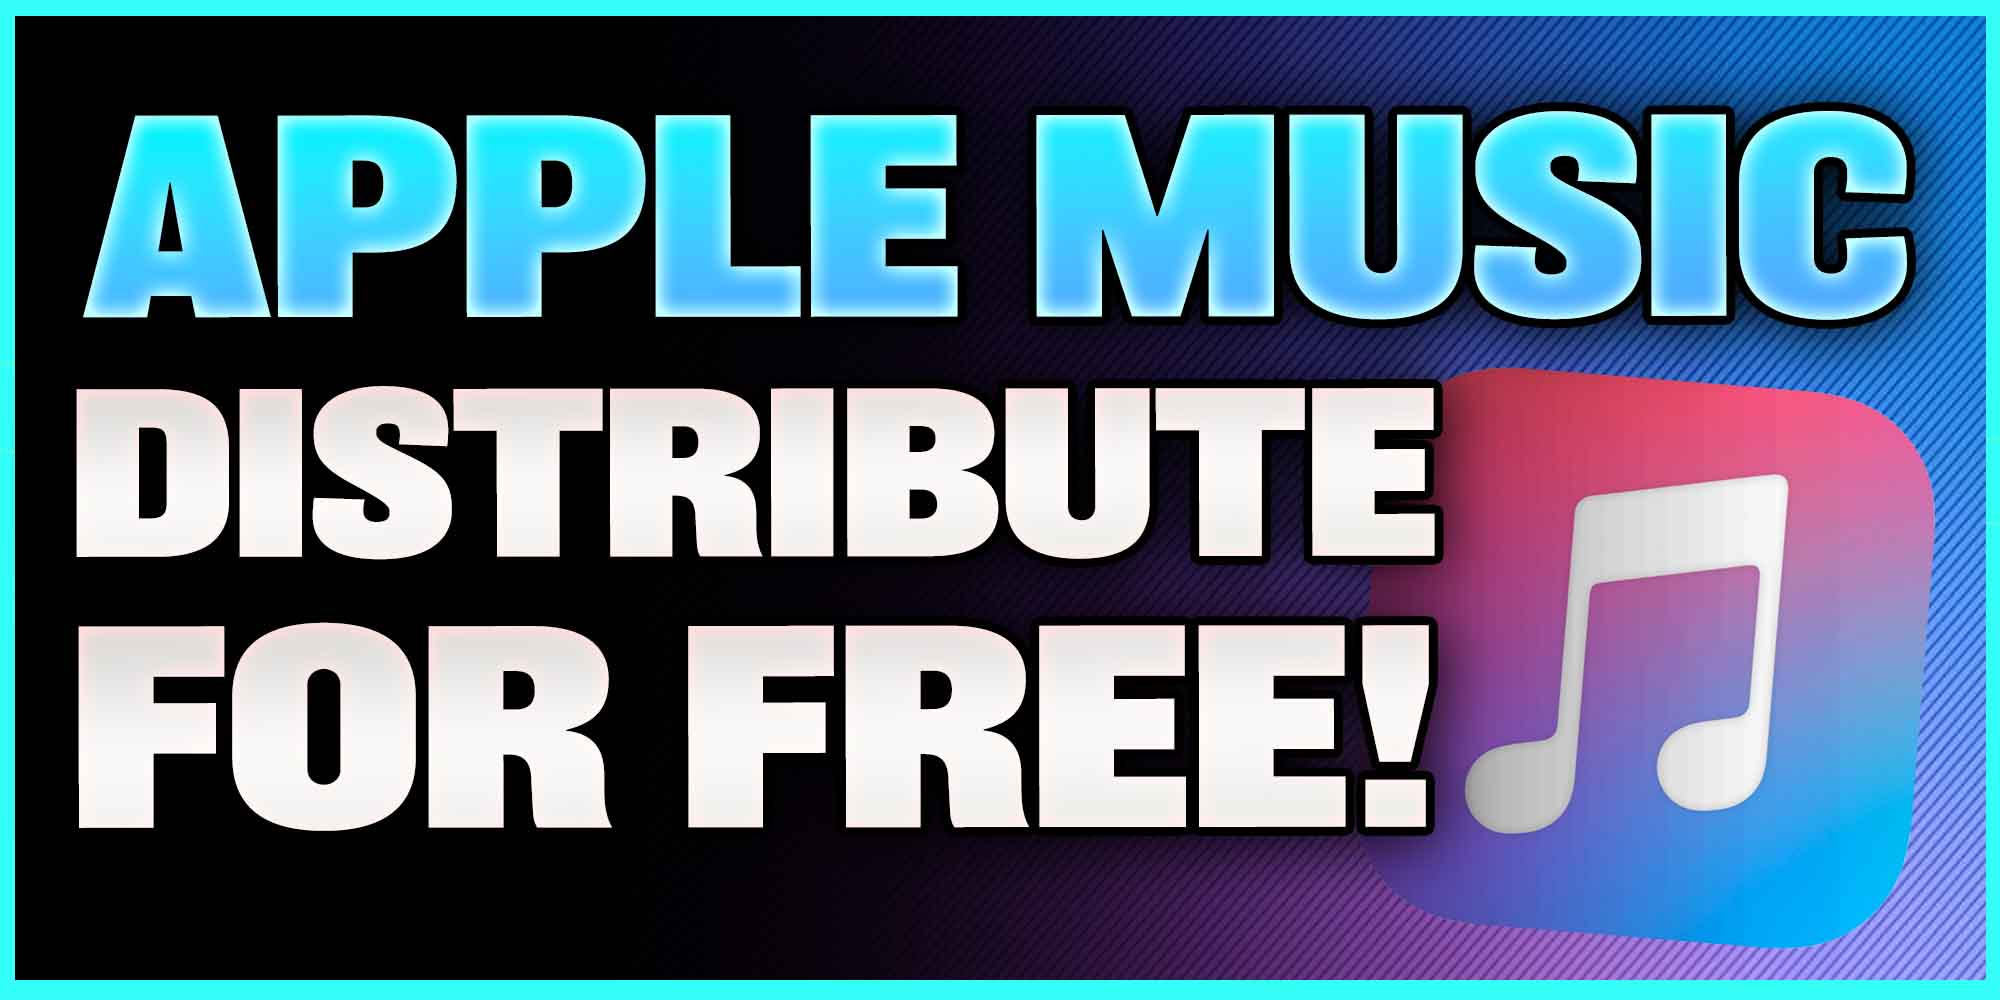 Tips for Working with Free Music on